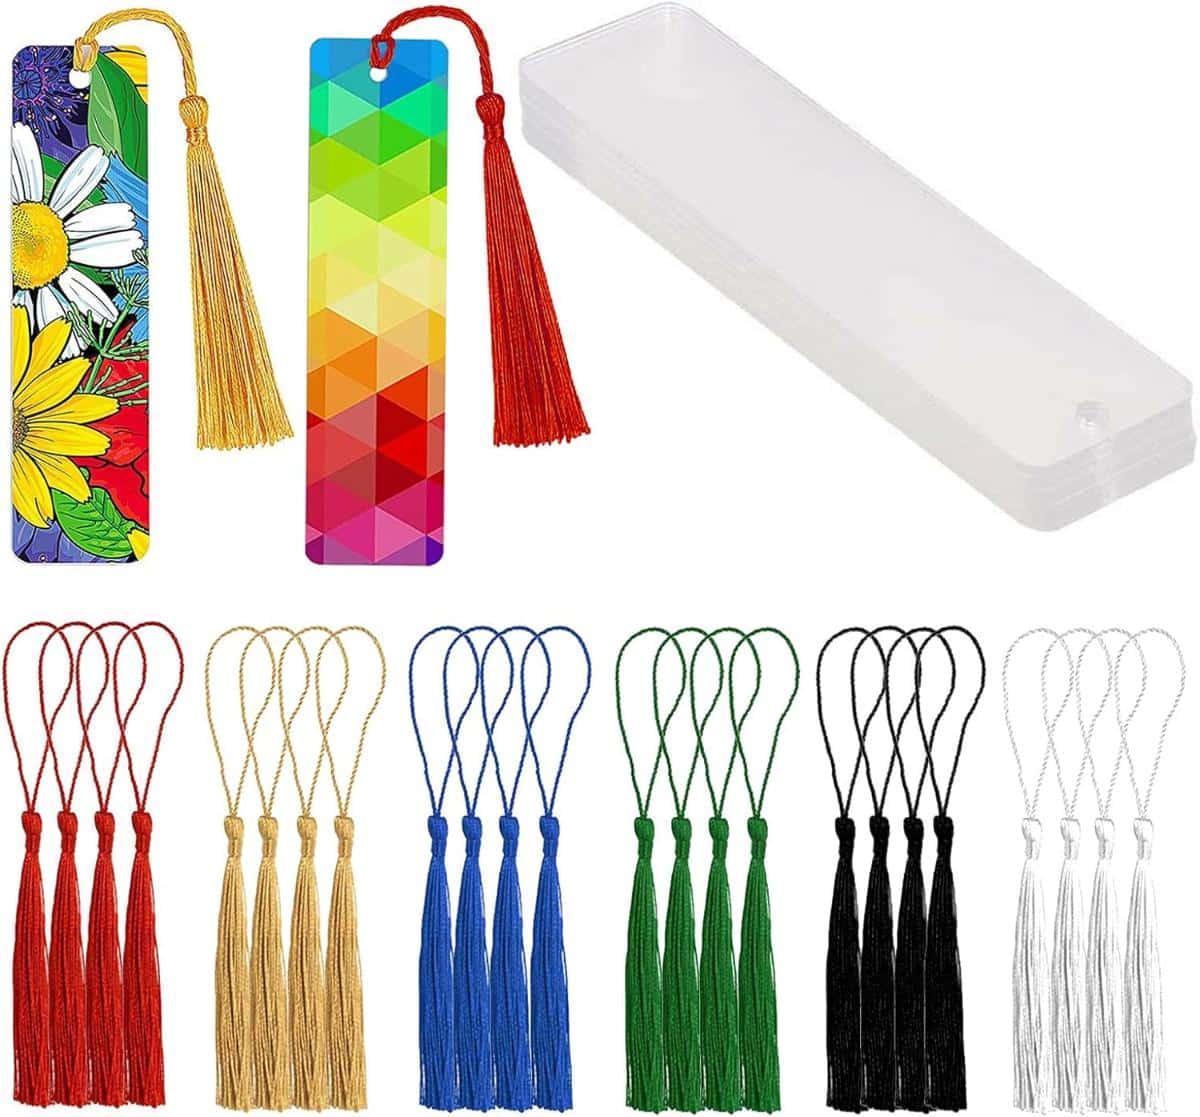 Acrylic Bookmark Blanks Colorful Tassels for DIY Projects and Present Tags